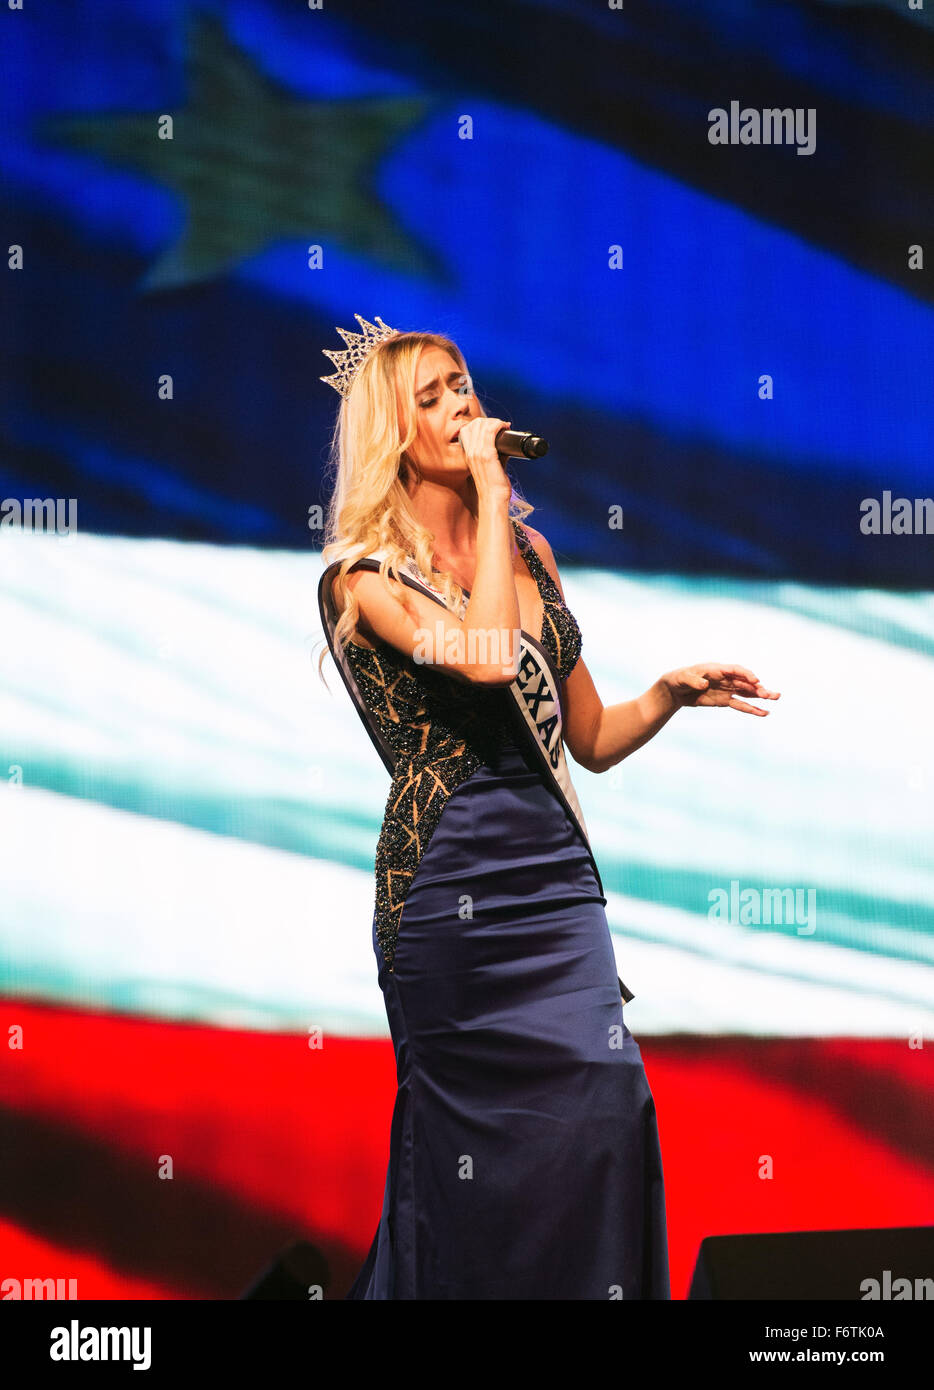 Houston, Texas, USA. 19th November, 2015. November 19, 2015: 2015  Miss Texas, Sarah Marie Blanon sings 'America The Beautiful' at the Opening ceremonies of the World Weightlifting Championships in Houston, Texas. Credit:  Brent Clark/Alamy Live News Stock Photo